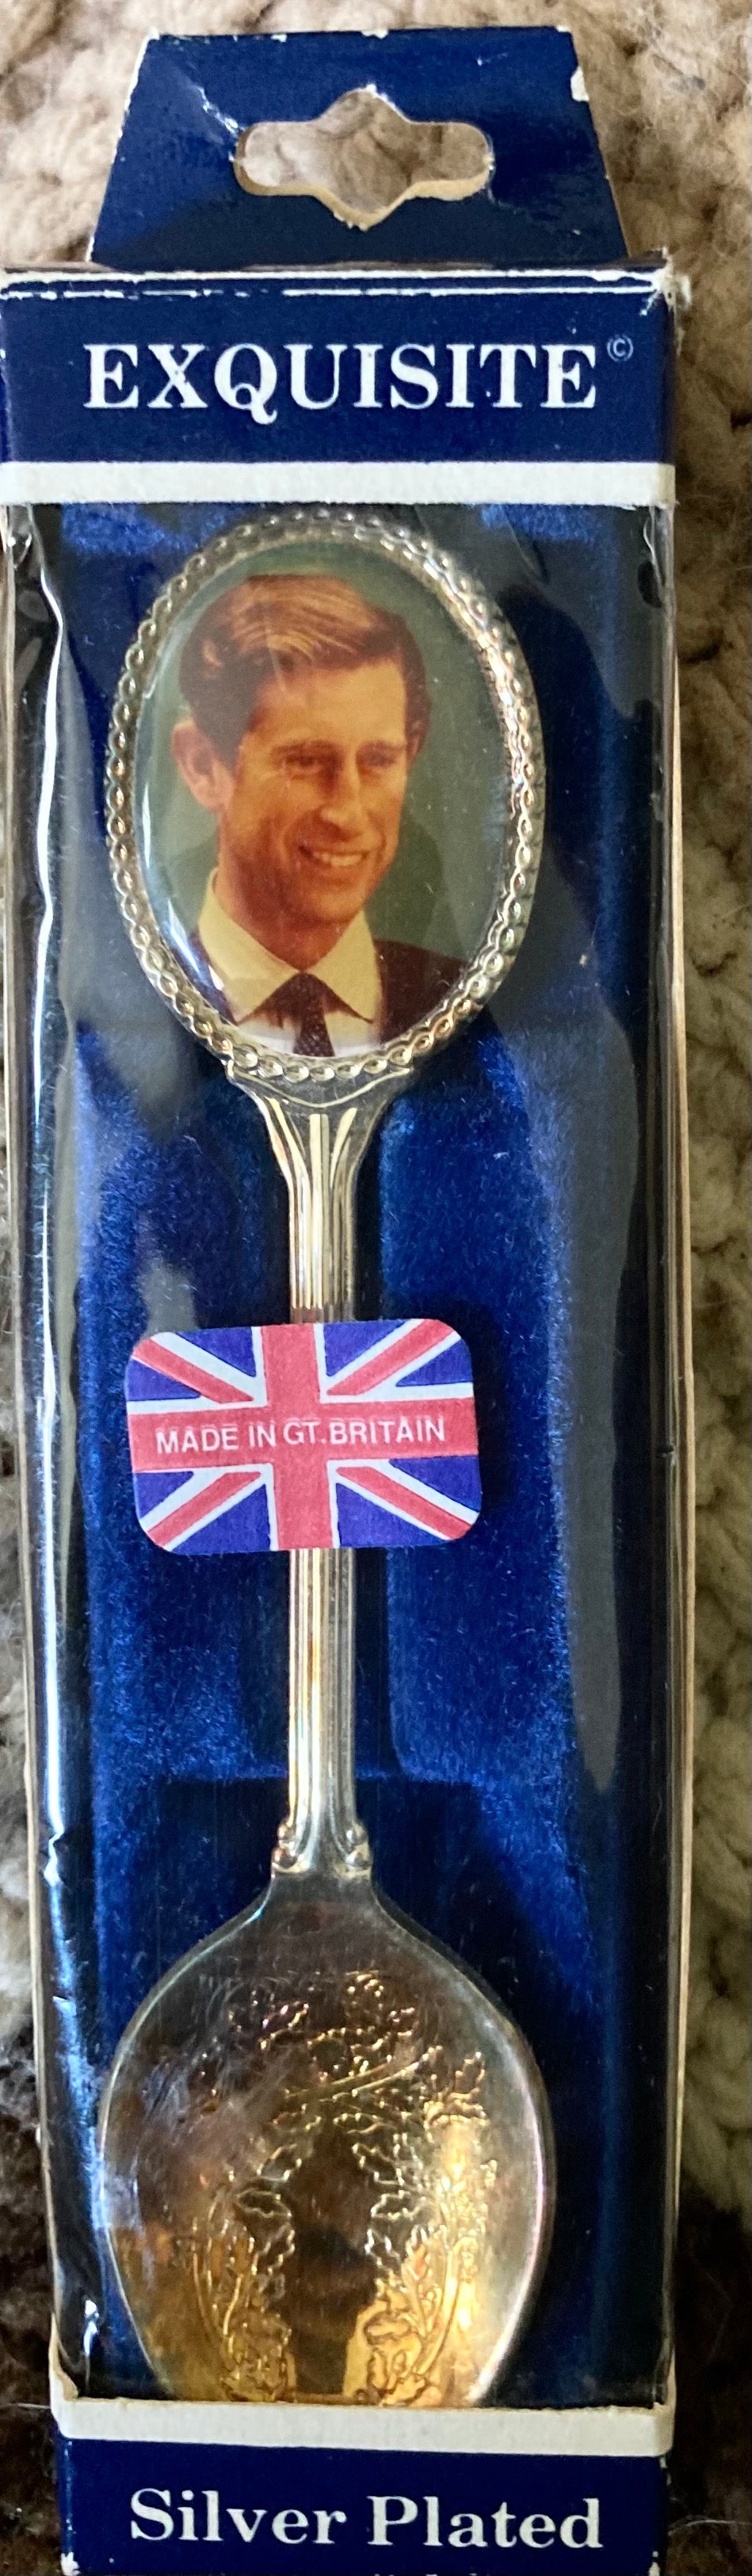 Exquisite Prince Charles Souvenir Silver Plated Spoon NWOT New Great Britain